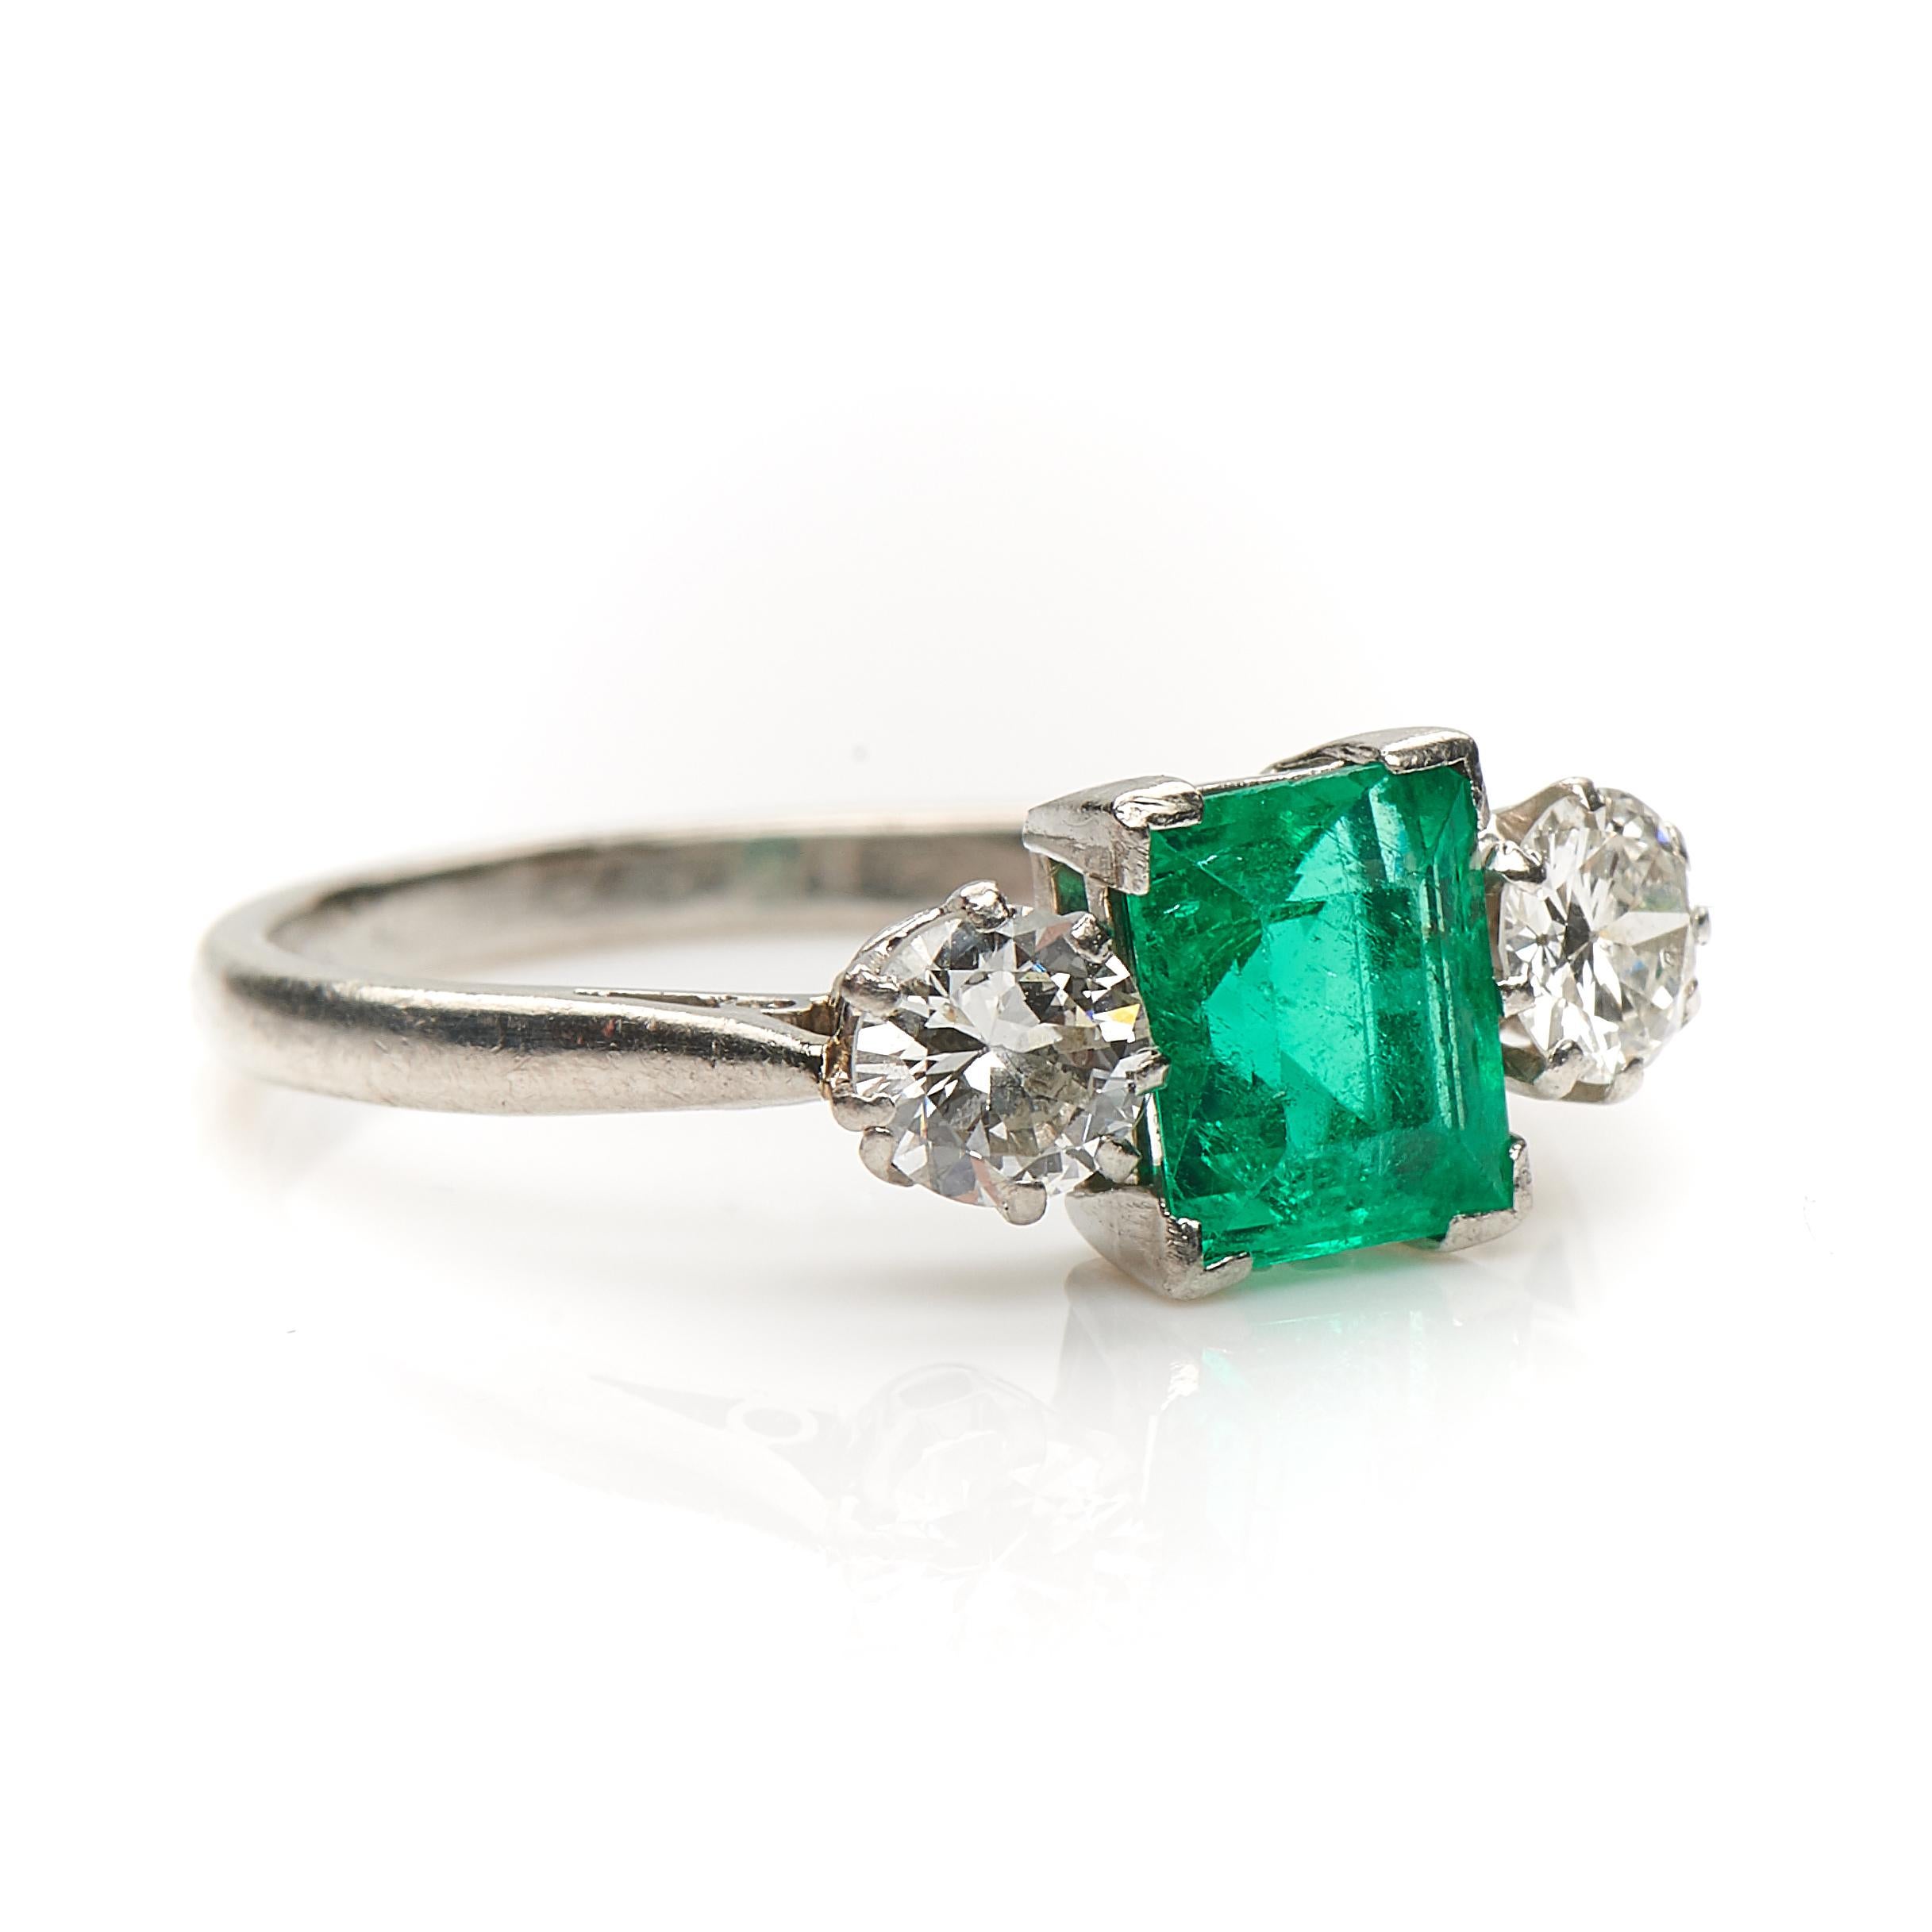 Art Deco, emerald and diamond ring, circa 1930. Centre set step-cut emerald flanked by two old-cut diamonds in a simple platinum setting. The emerald is a beautiful fresh green colour and the diamonds are bright white and have a lively sparkle,